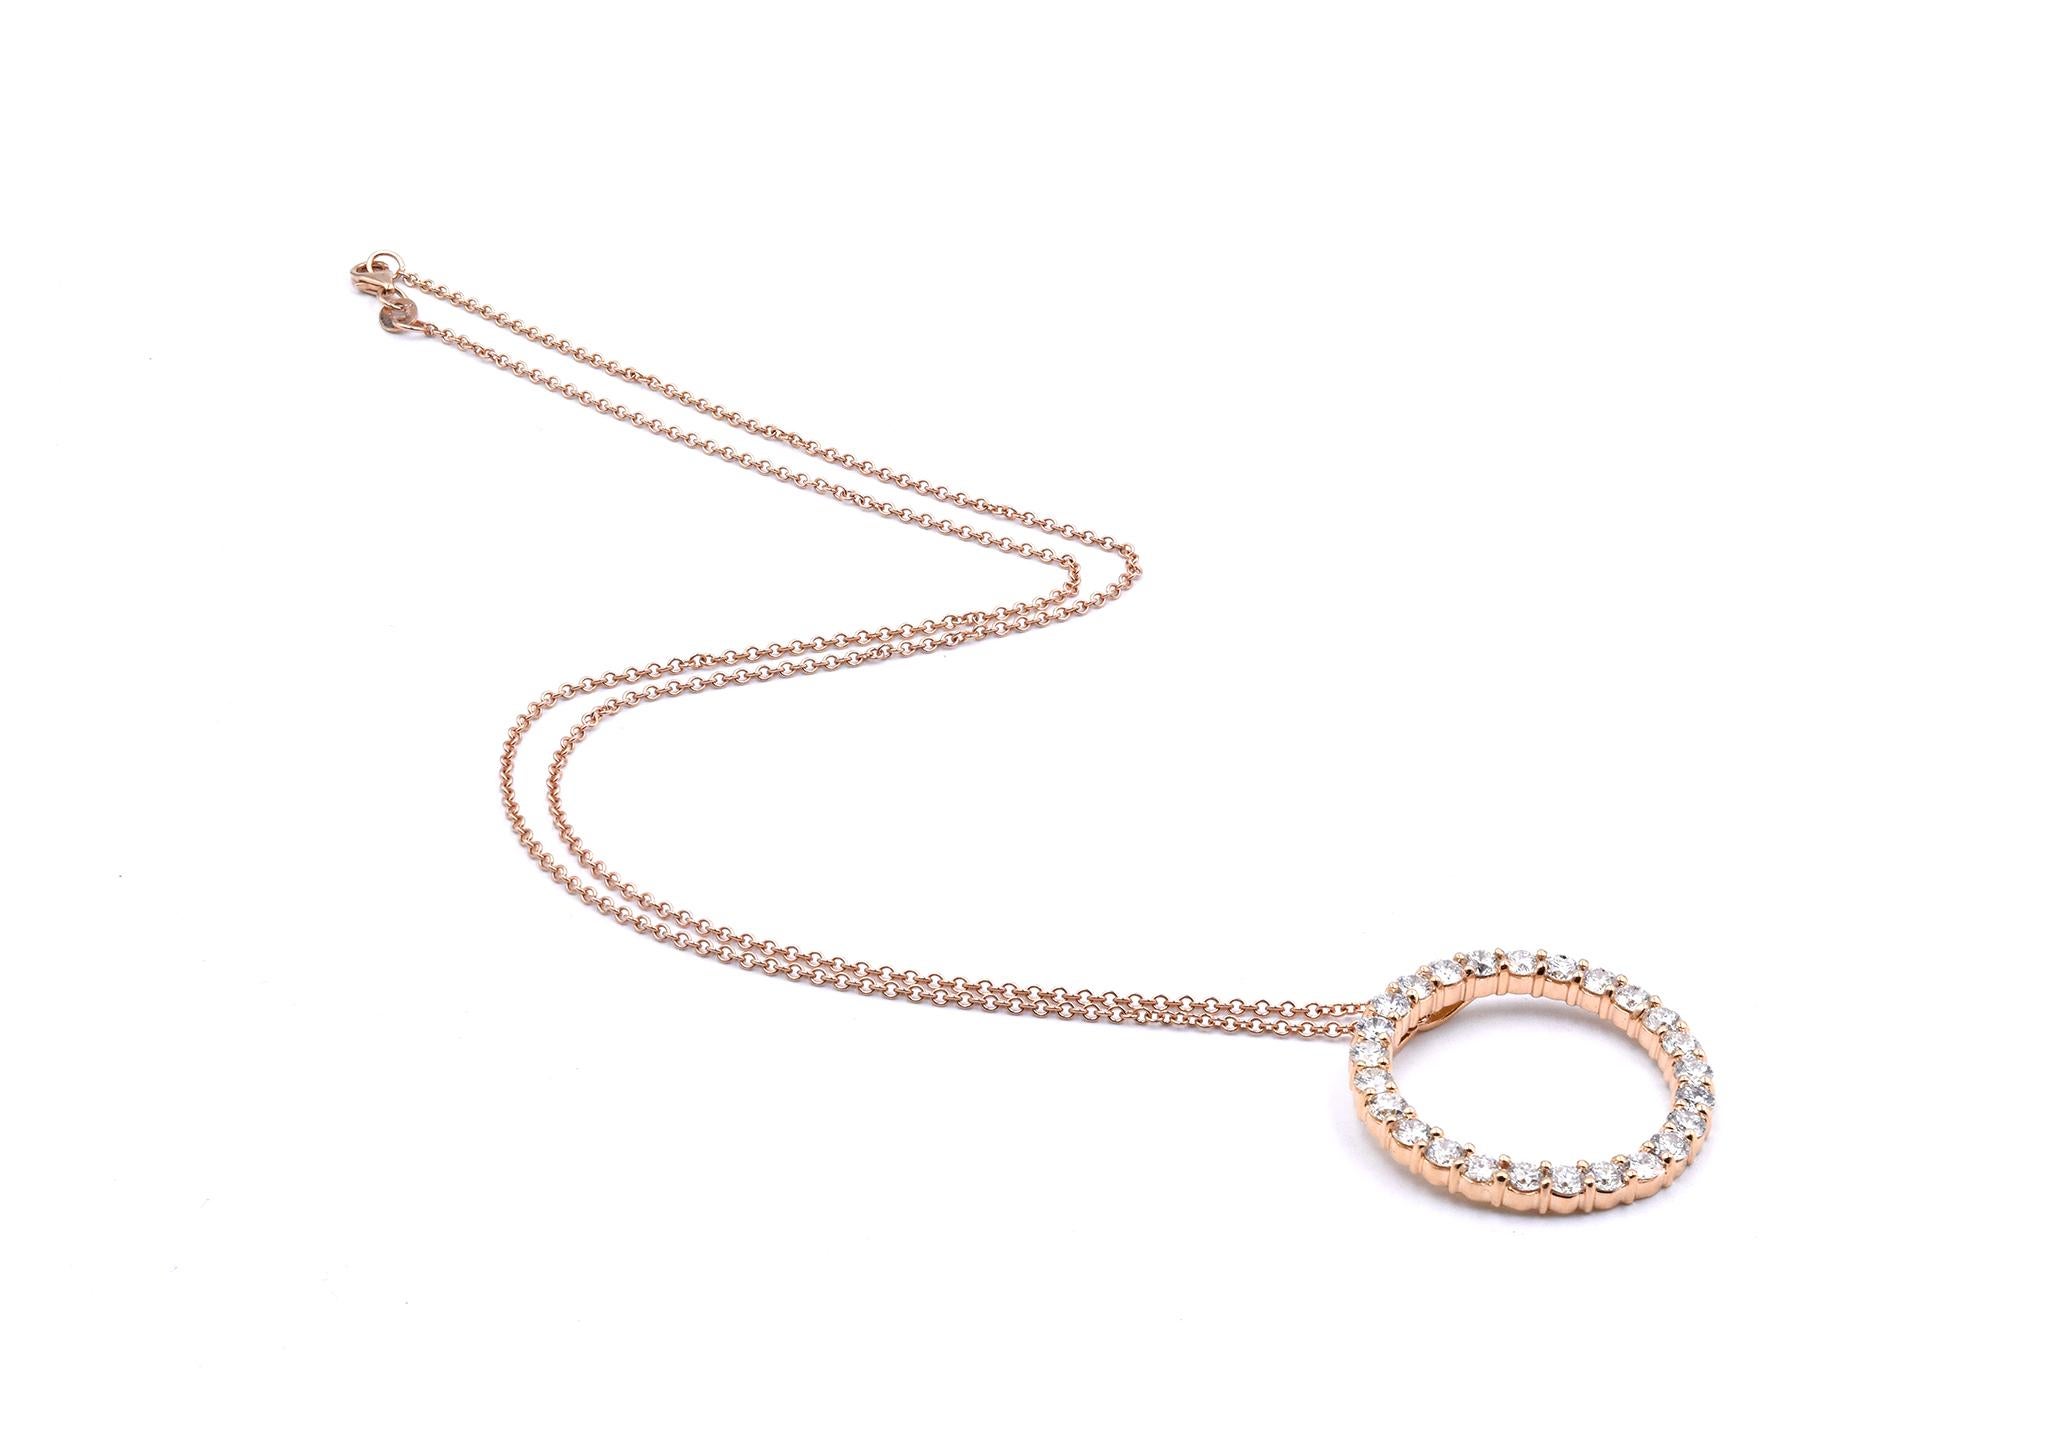 Designer: Roberto Coin 
Material: 18k rose gold
Diamonds: 25 round brilliant cuts = 2.30cttw
Color: G
Clarity: VS1
Dimensions: necklace measures 20-inches
Weight: 9.48 grams
Retail: $6850
